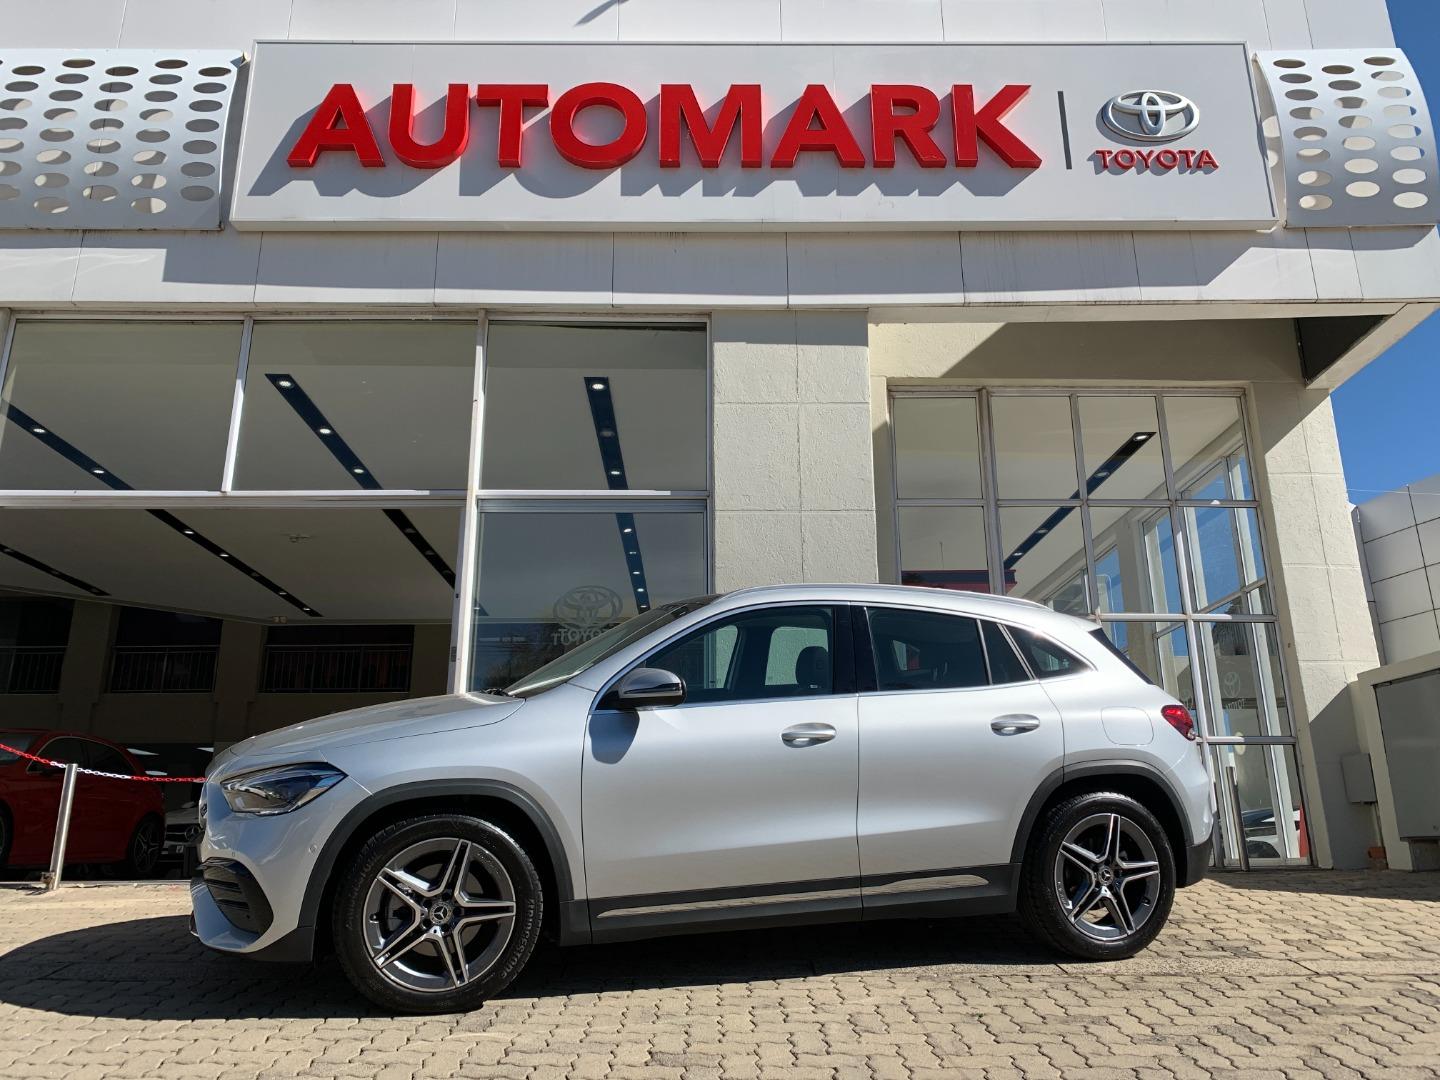 2023 Mercedes-Benz Gla My23 200 At for sale - 342787